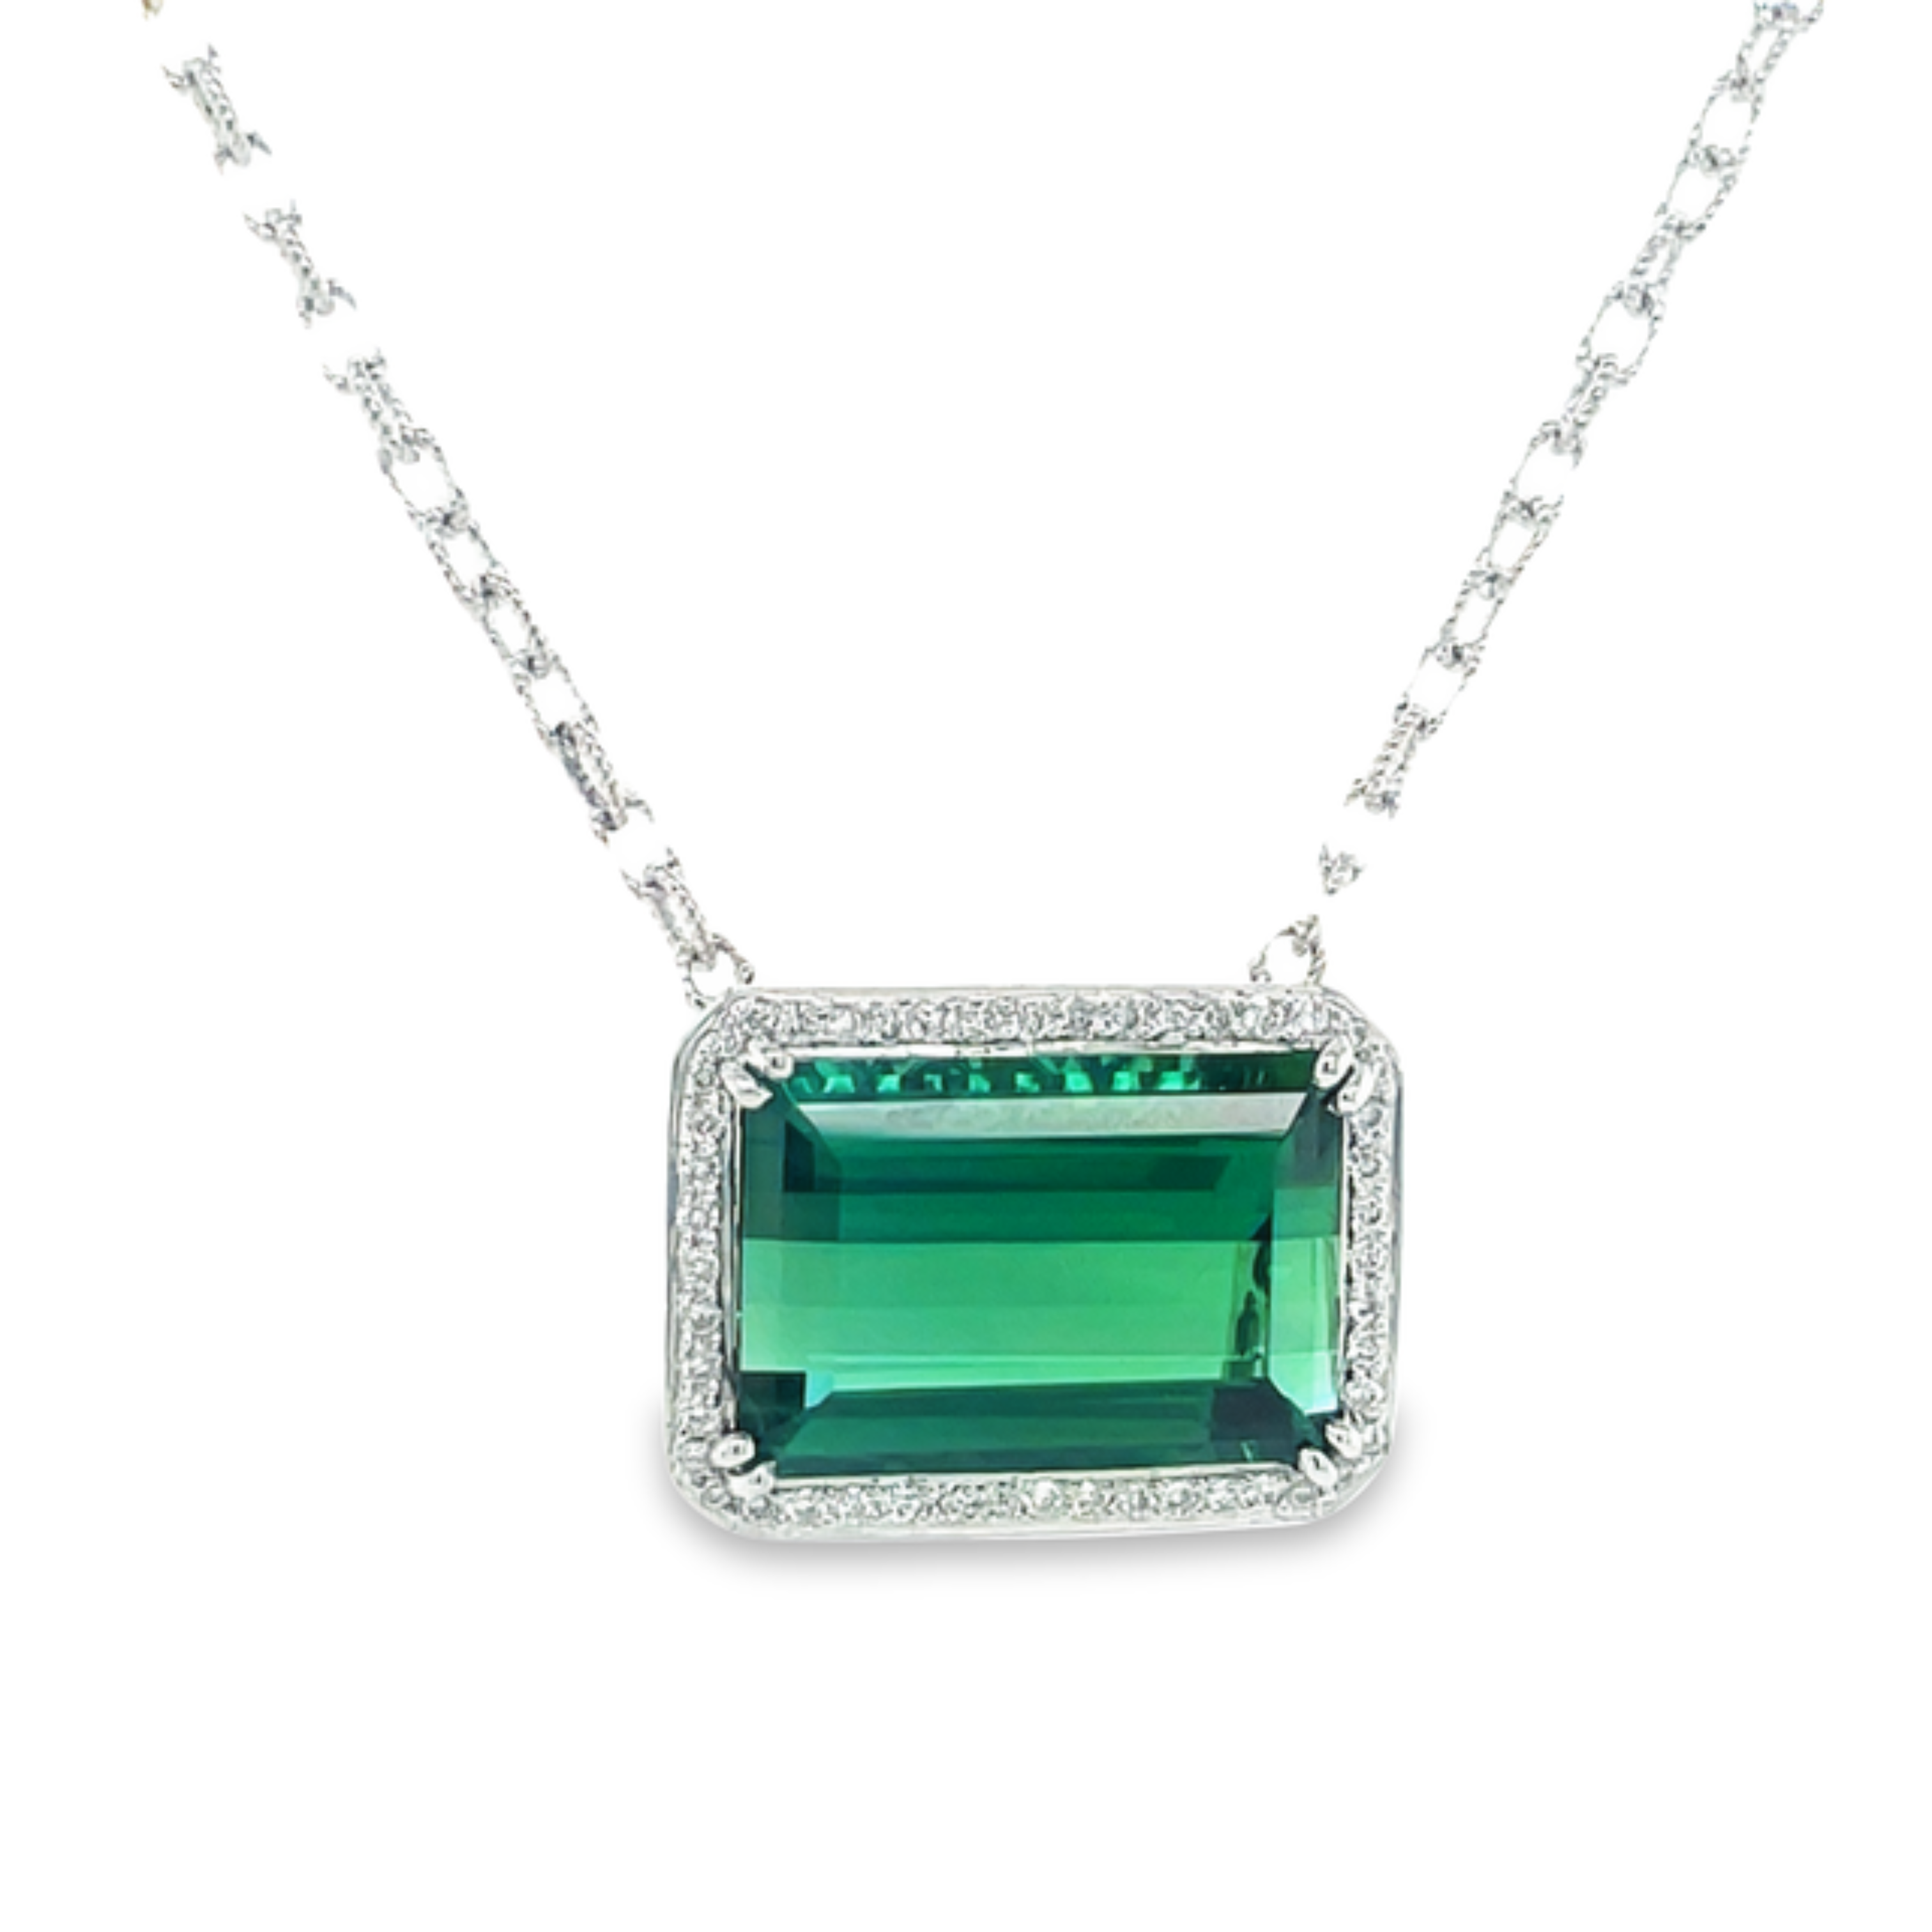 Emerald Cut Green Tourmaline Necklace   Brazilian gem  Perfect symmetry & cut   Diamonds 0.84 cts  Set in 18 white gold  22.00 x 16.00 mm size  White gold chain 18"  Secure lobster catch